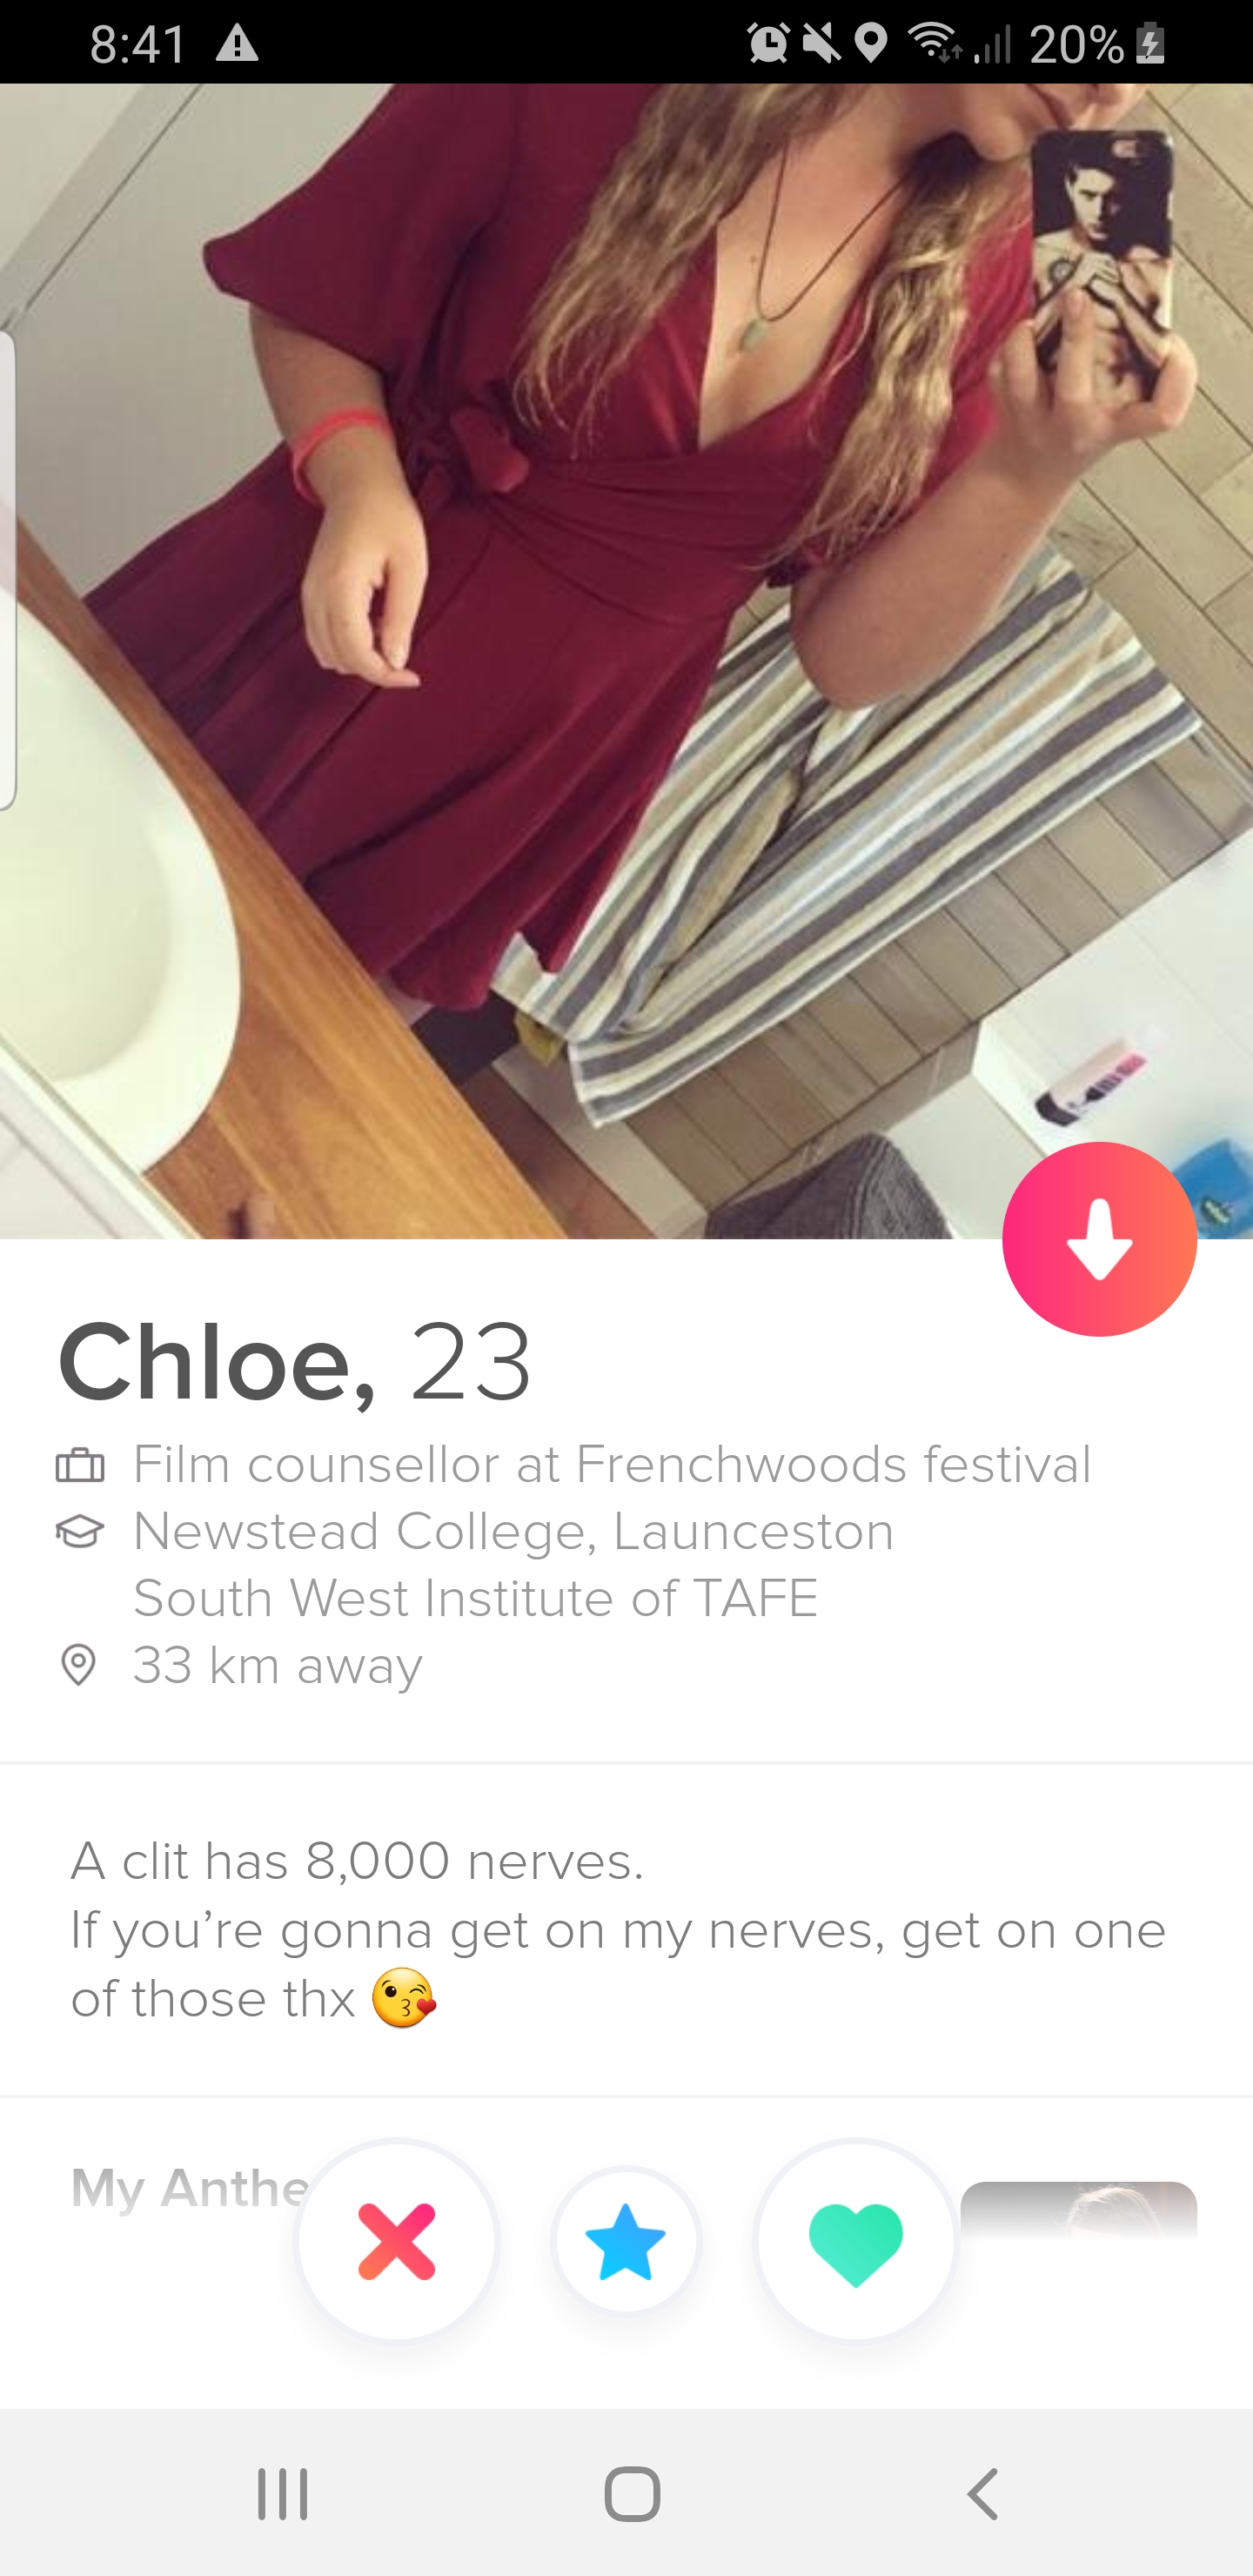 website - A Oxo. 20% Chloe, 23 Film counsellor at Frenchwoods festival Newstead College Launceston South West Institute of Tafe 33 km away A clit has 8,000 nerves. If you're gonna get on my nerves, get on one of those thx My Anthe X